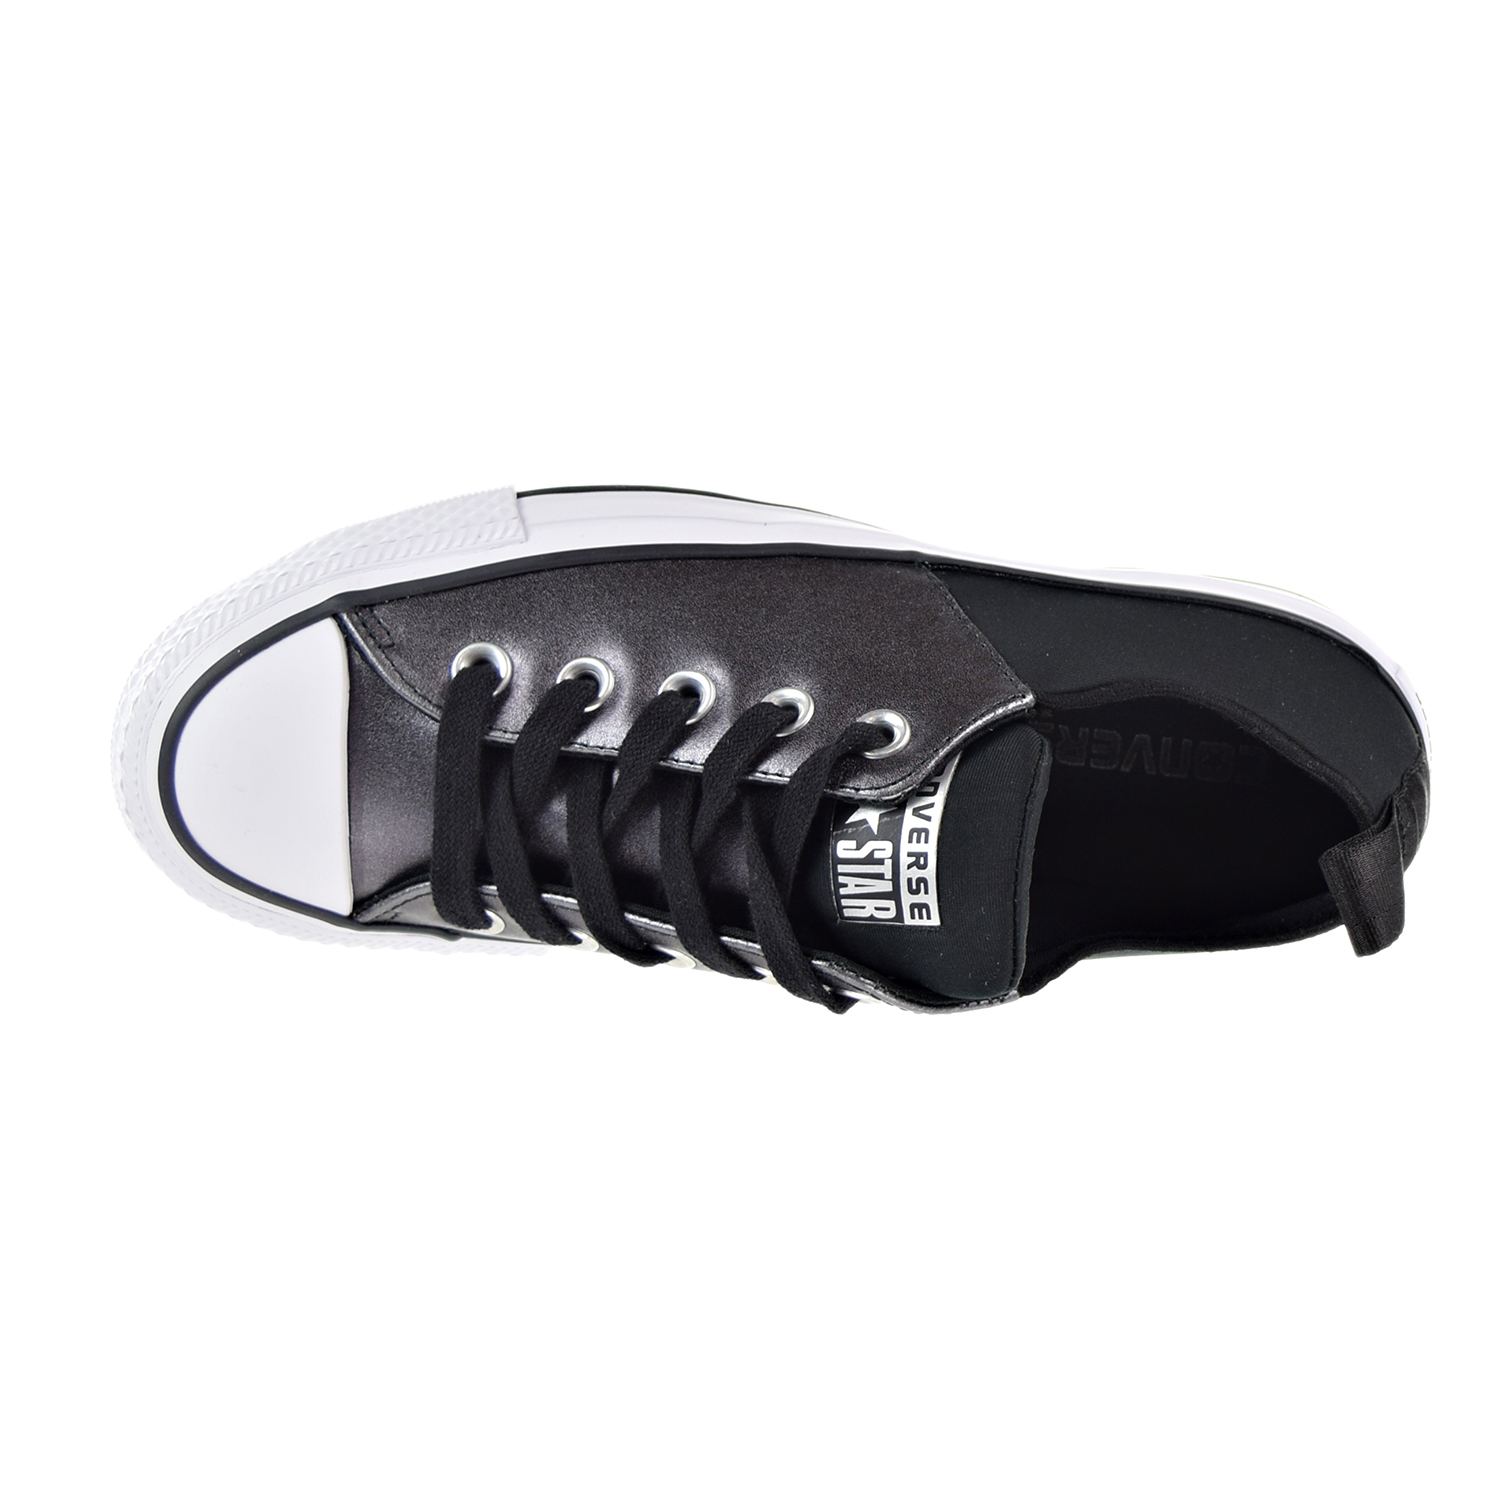 Converse Chuck Taylor All Star Sloane Glam Leather Low Top Women's Shoe Black/White555835c - image 5 of 6